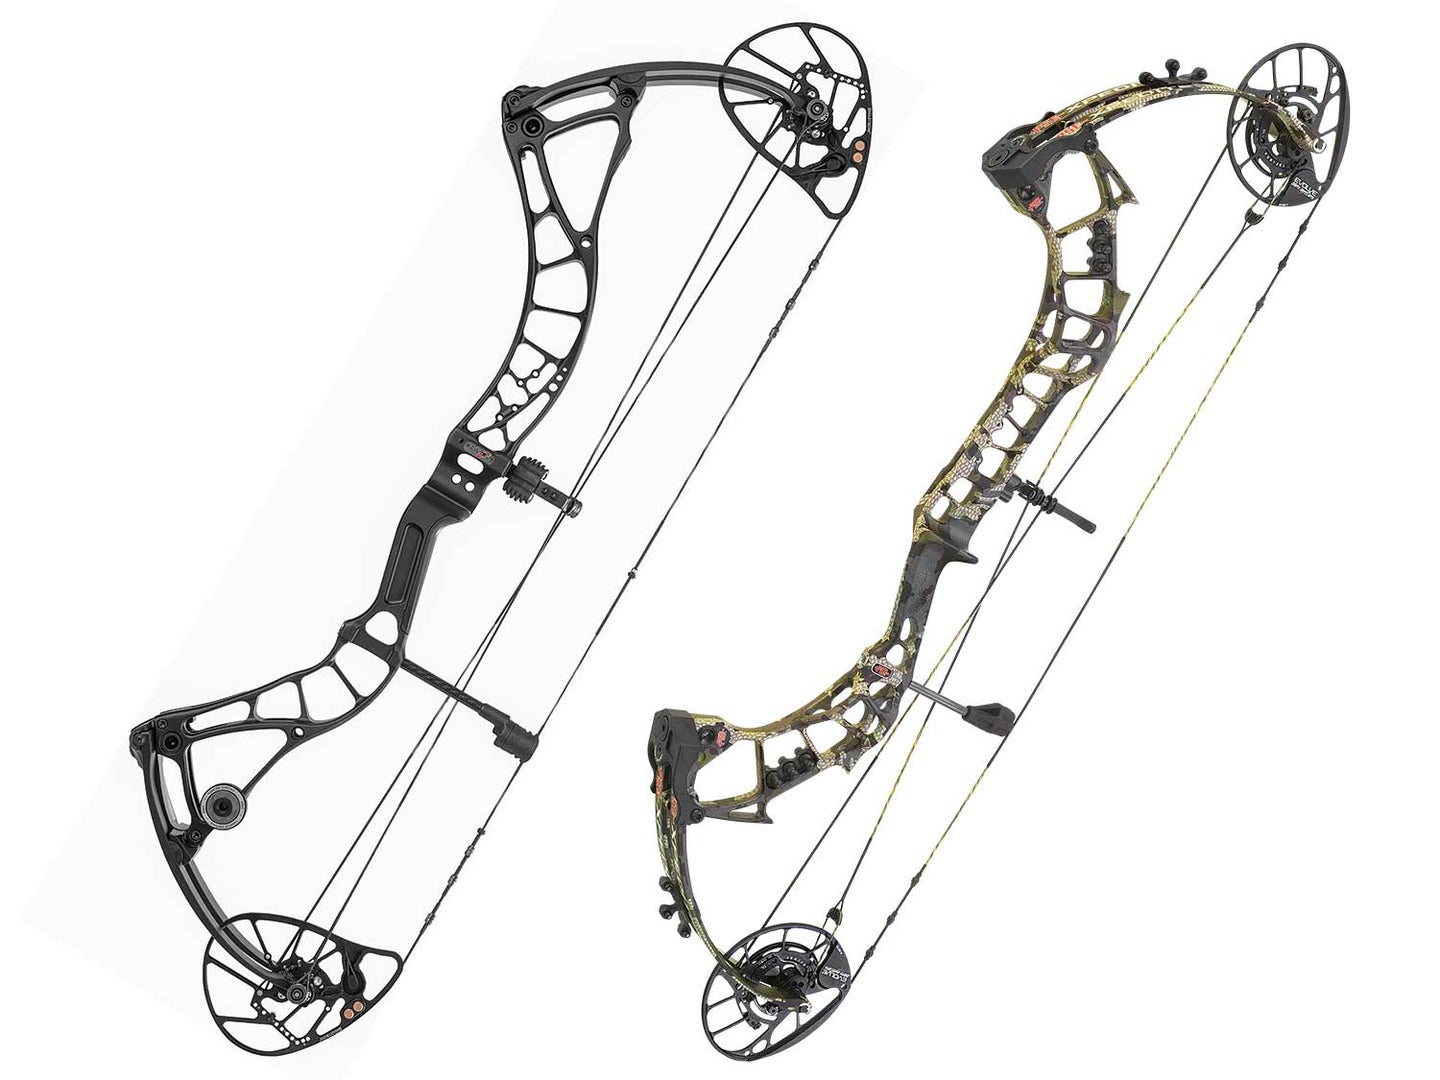 Bowtech Realm SR6 and the PSE Expedite compound bow.